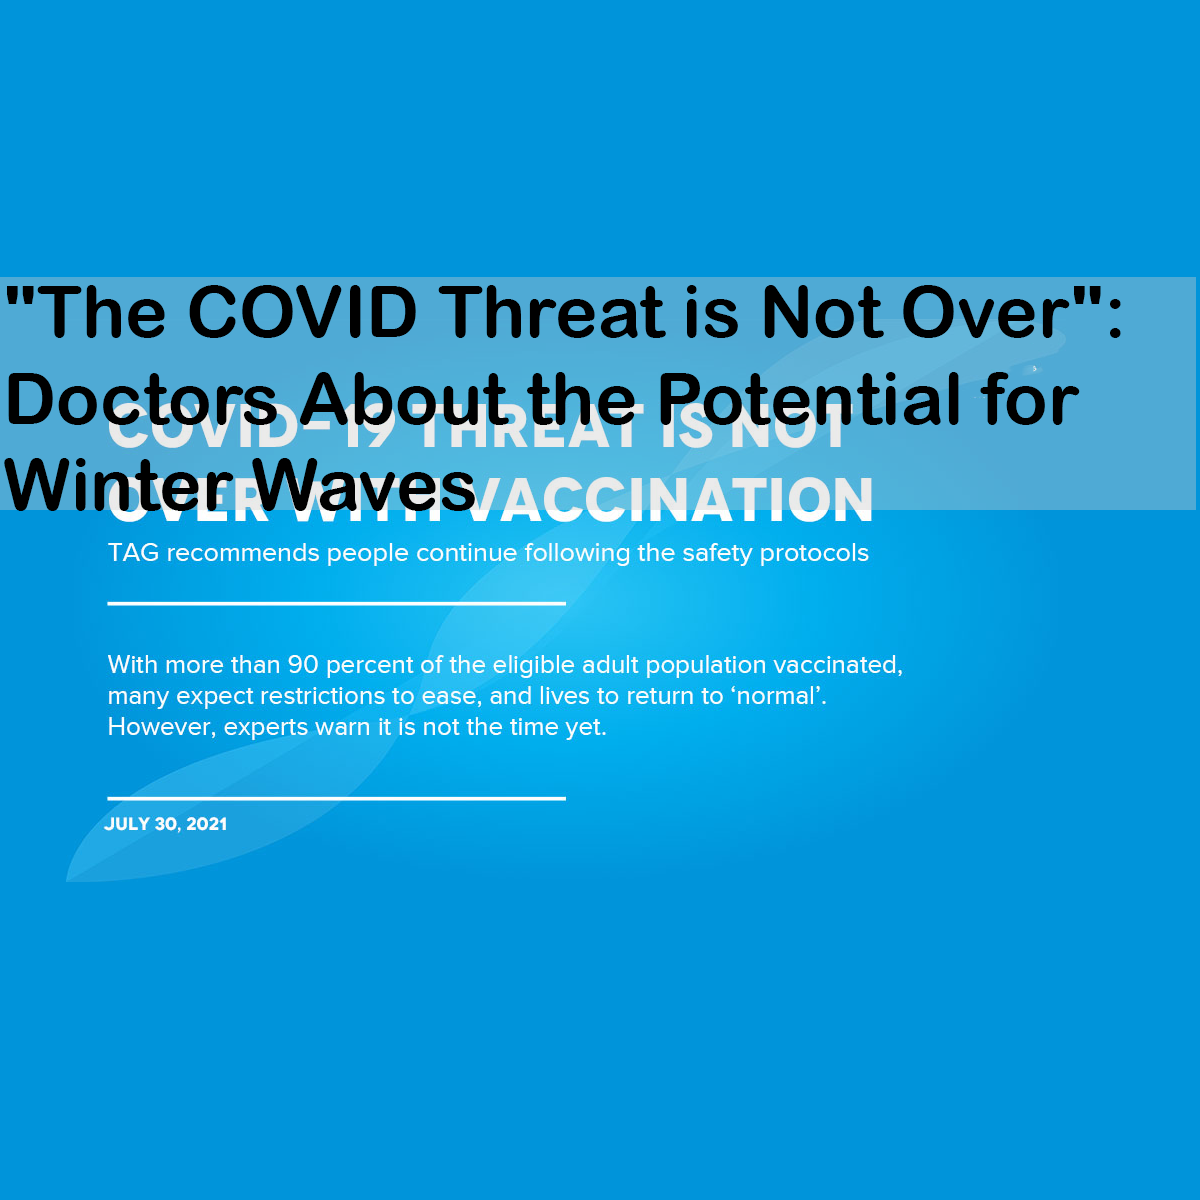 "The COVID Threat is Not Over": Doctors About the Potential for Winter Waves